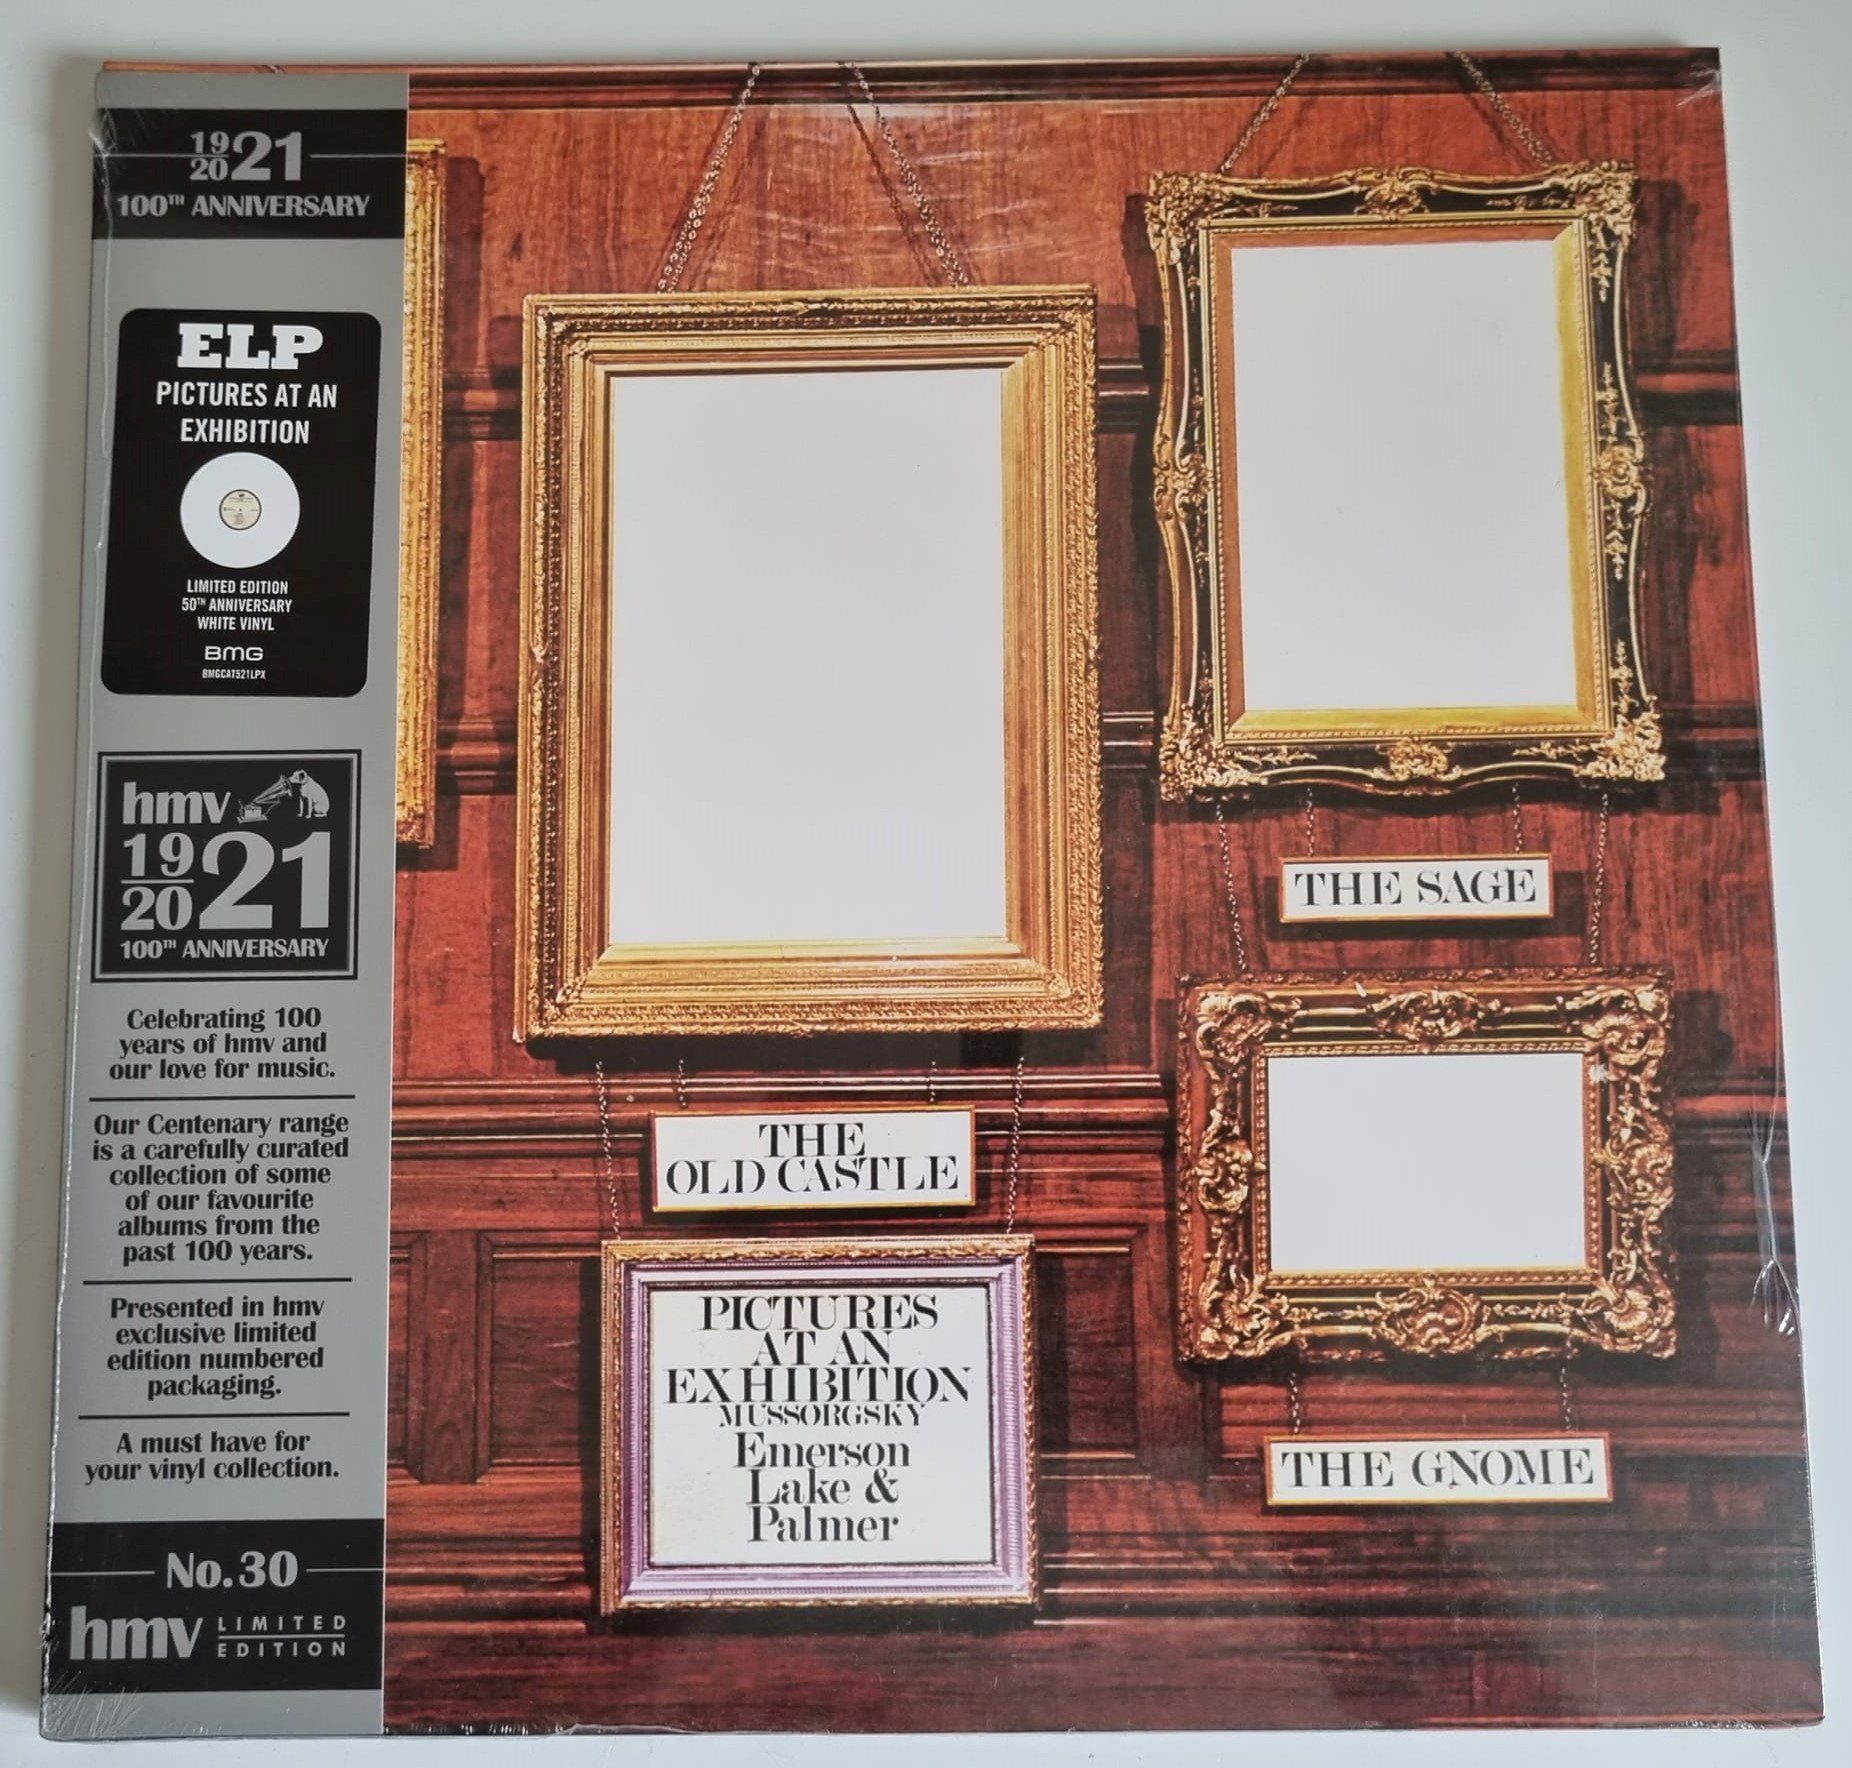 Buy this rare Emerson Lake & Palmer record by clicking here